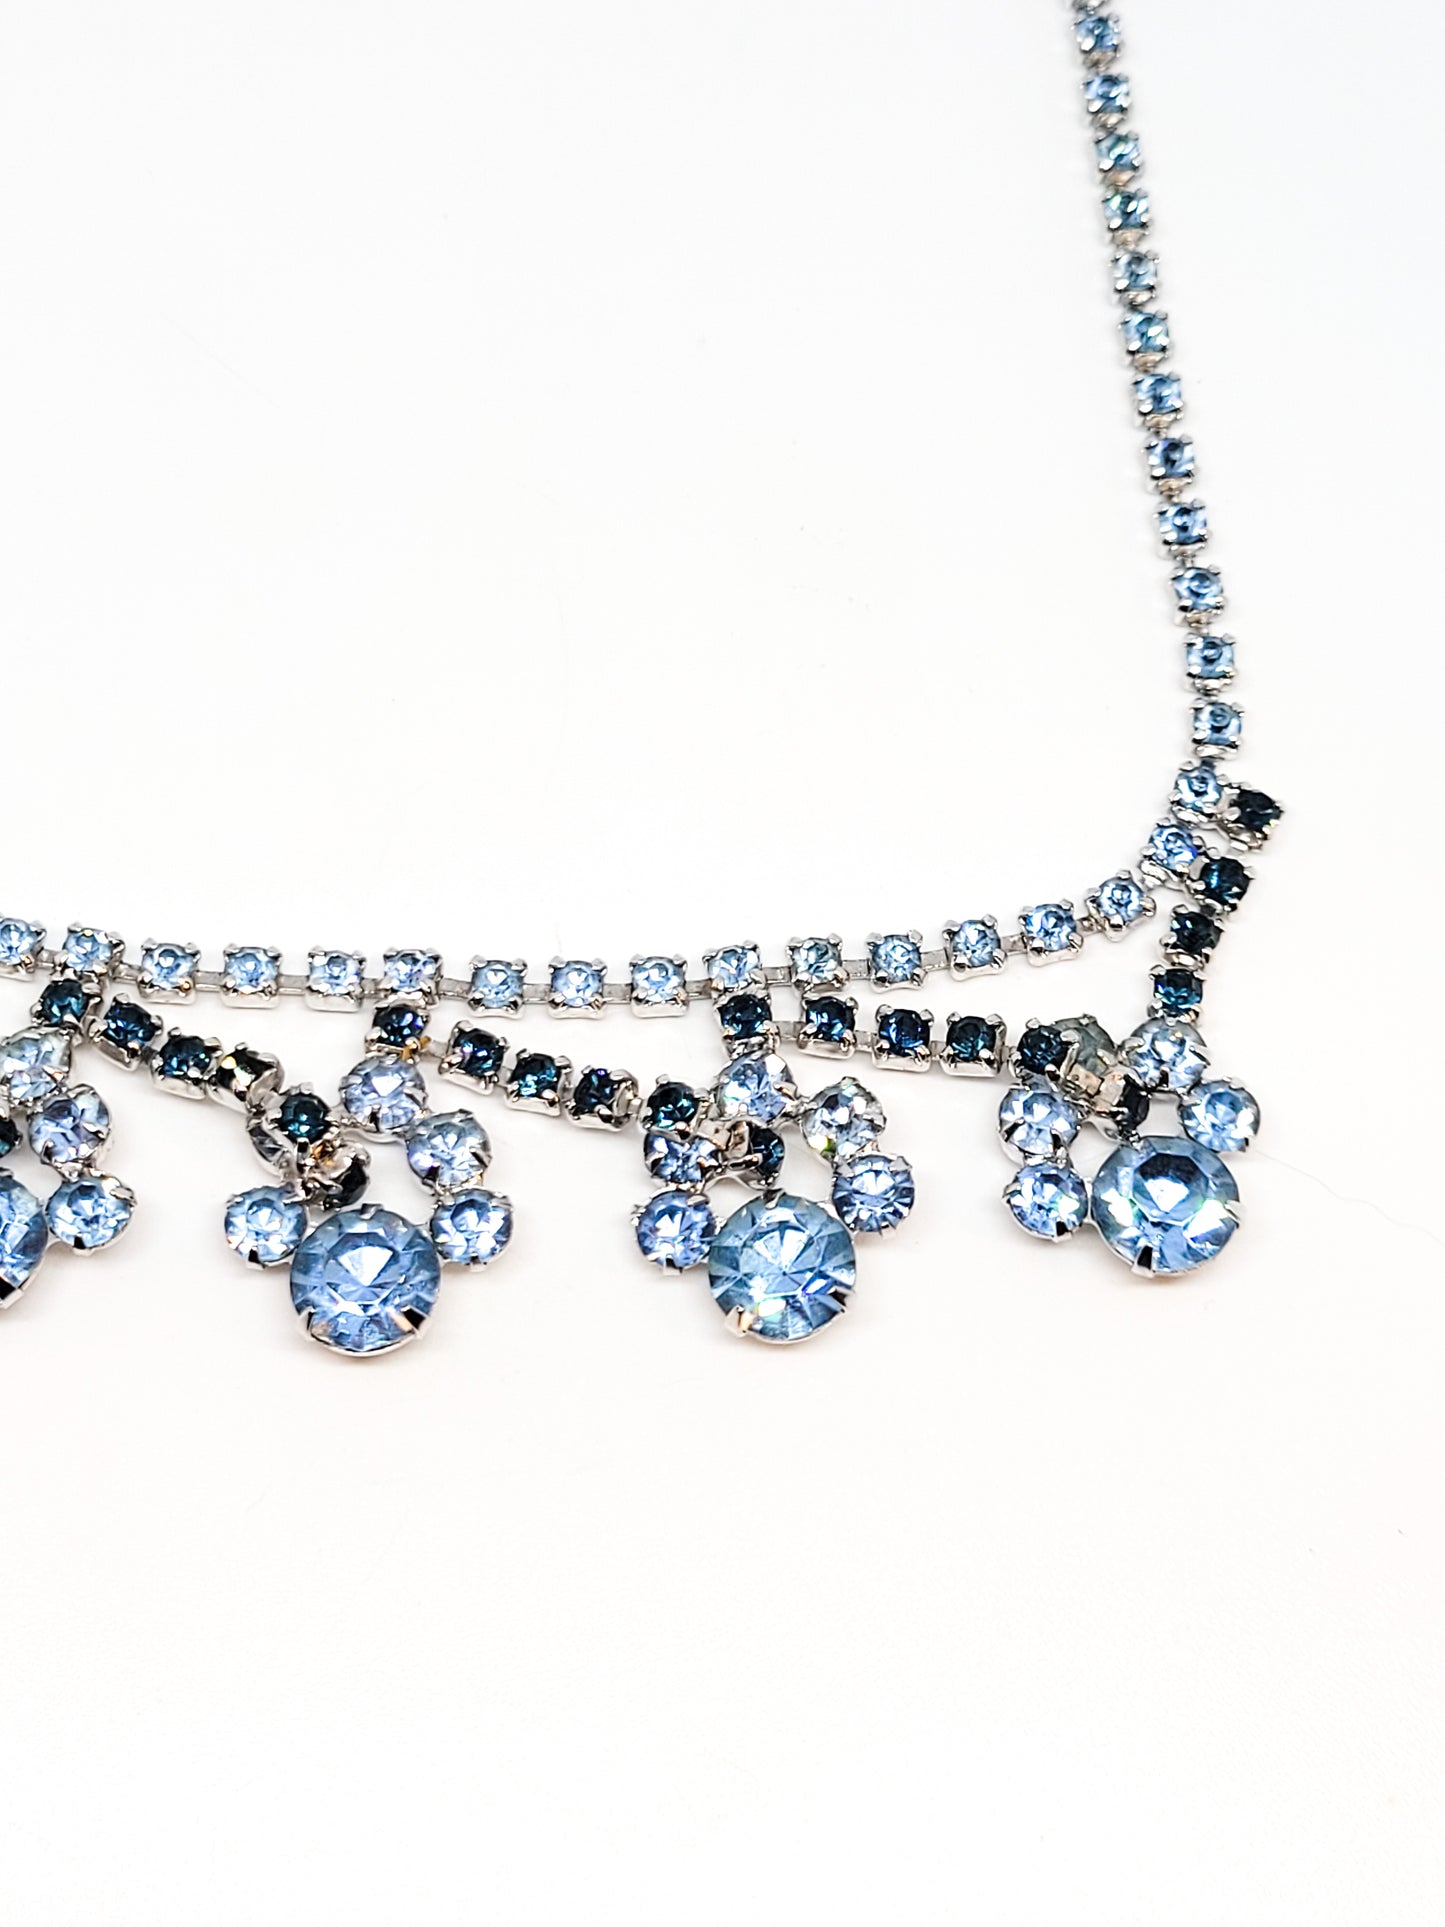 Something blue navy and baby blue rhinestone cupped flower bib vintage necklace